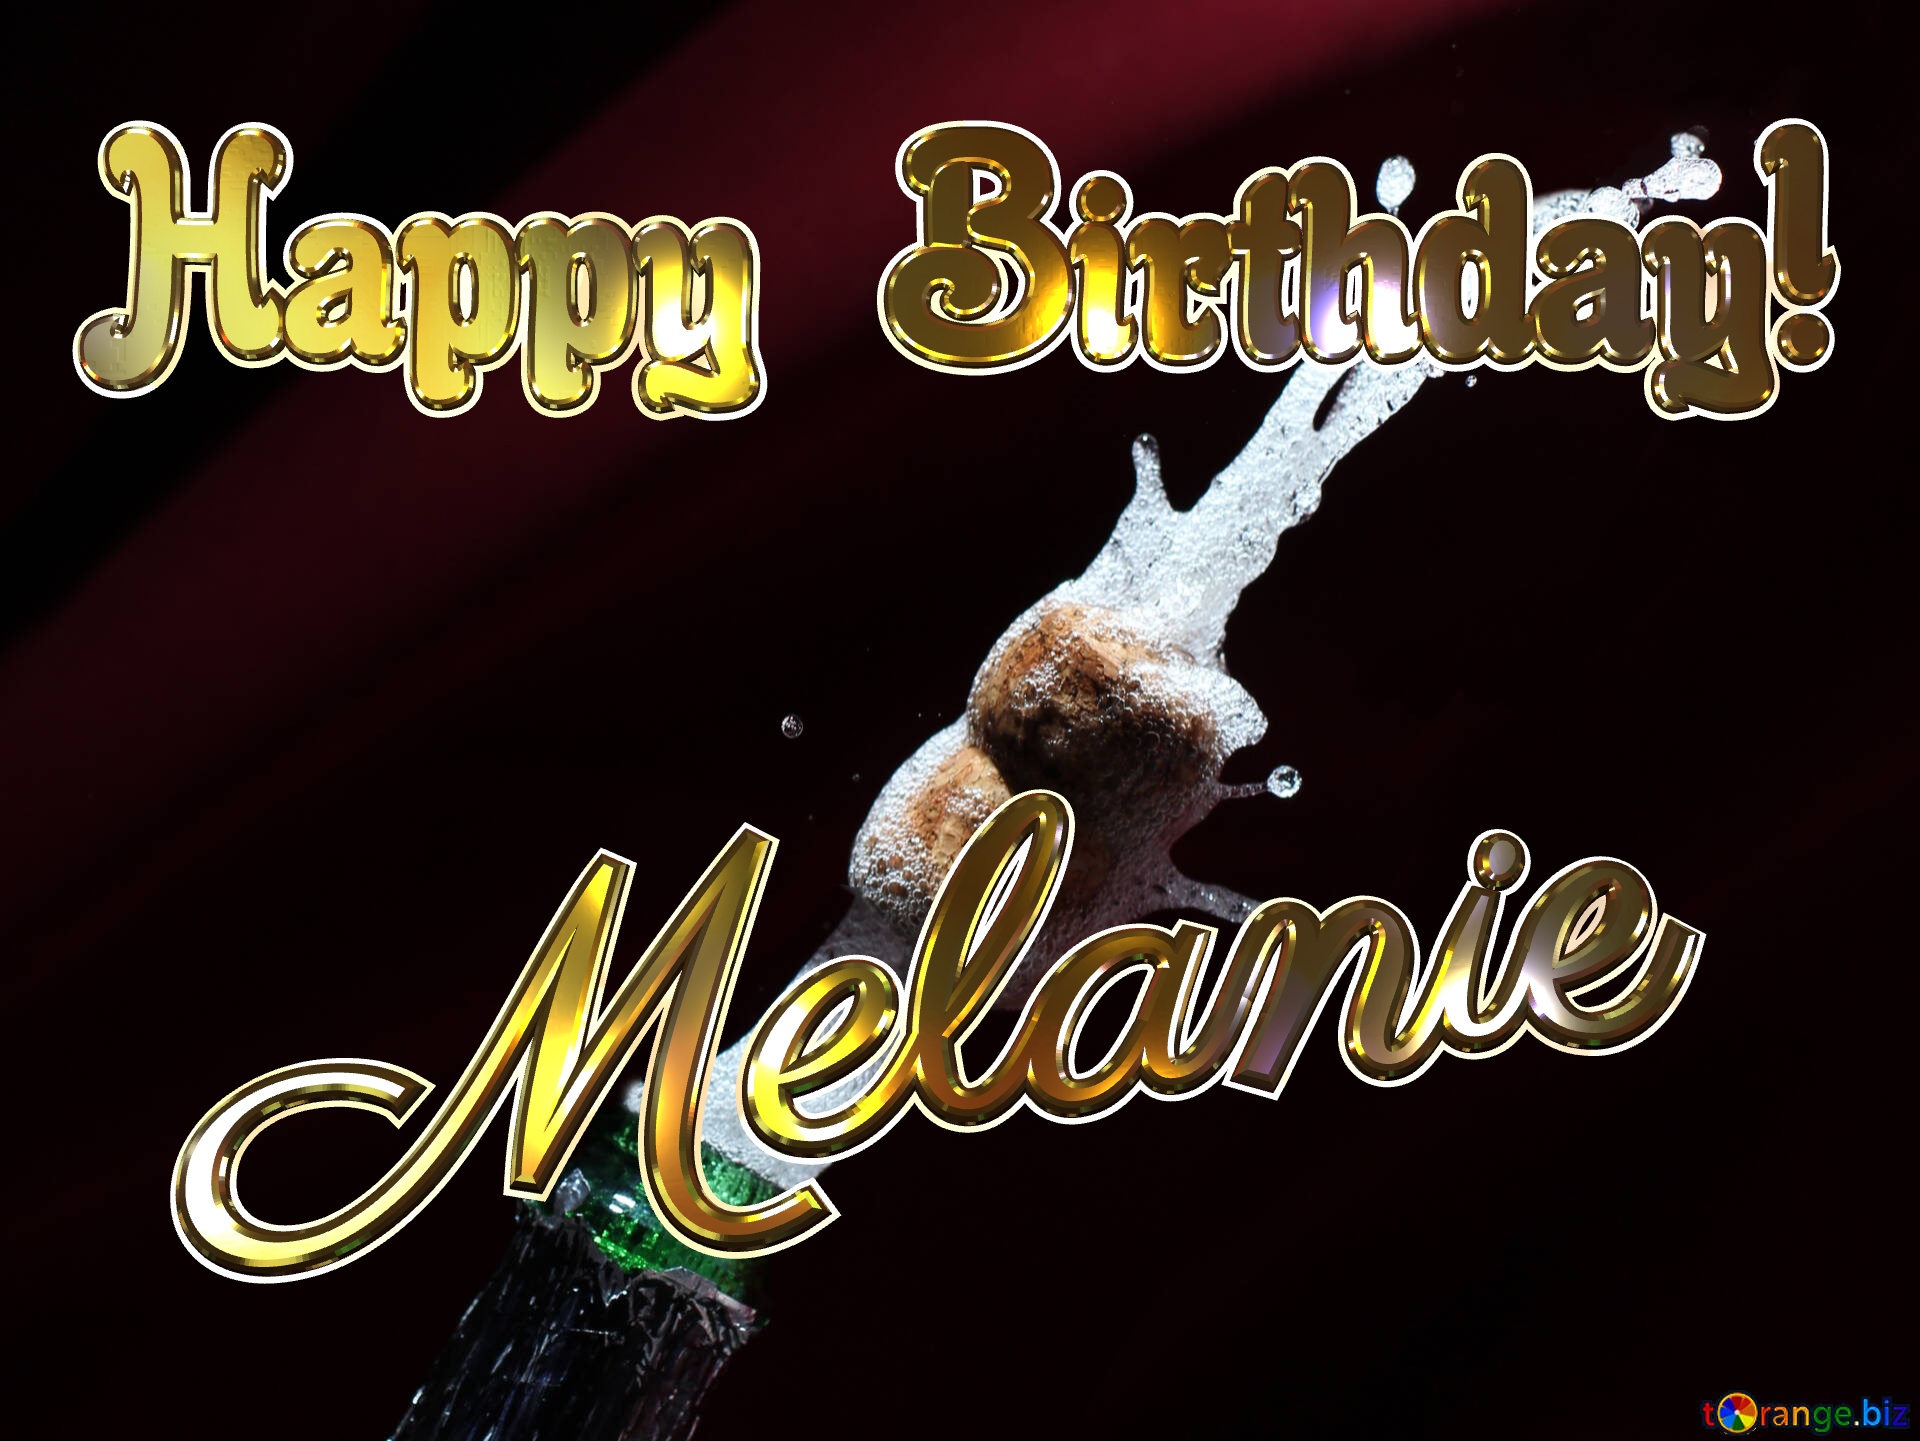 Champagne Melanie Happy Birthday! Champagne cork flying out of the bottle №25886